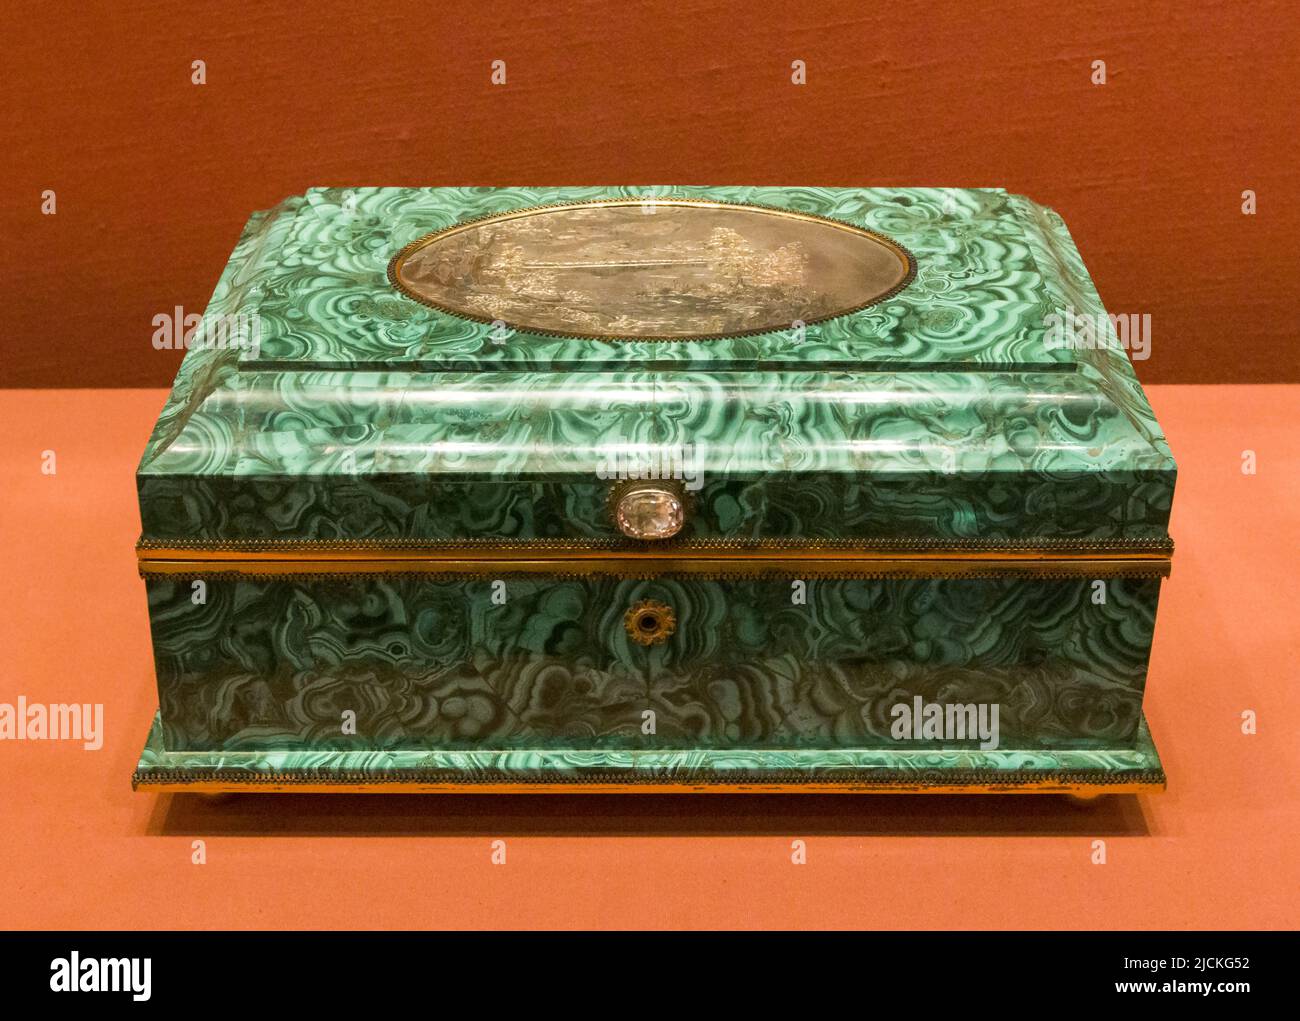 Beijing central gifts cultural relics management center - 1954 nikita Khrushchev with MAO zedongs gold-plated copper inlay malachite long boxes Stock Photo